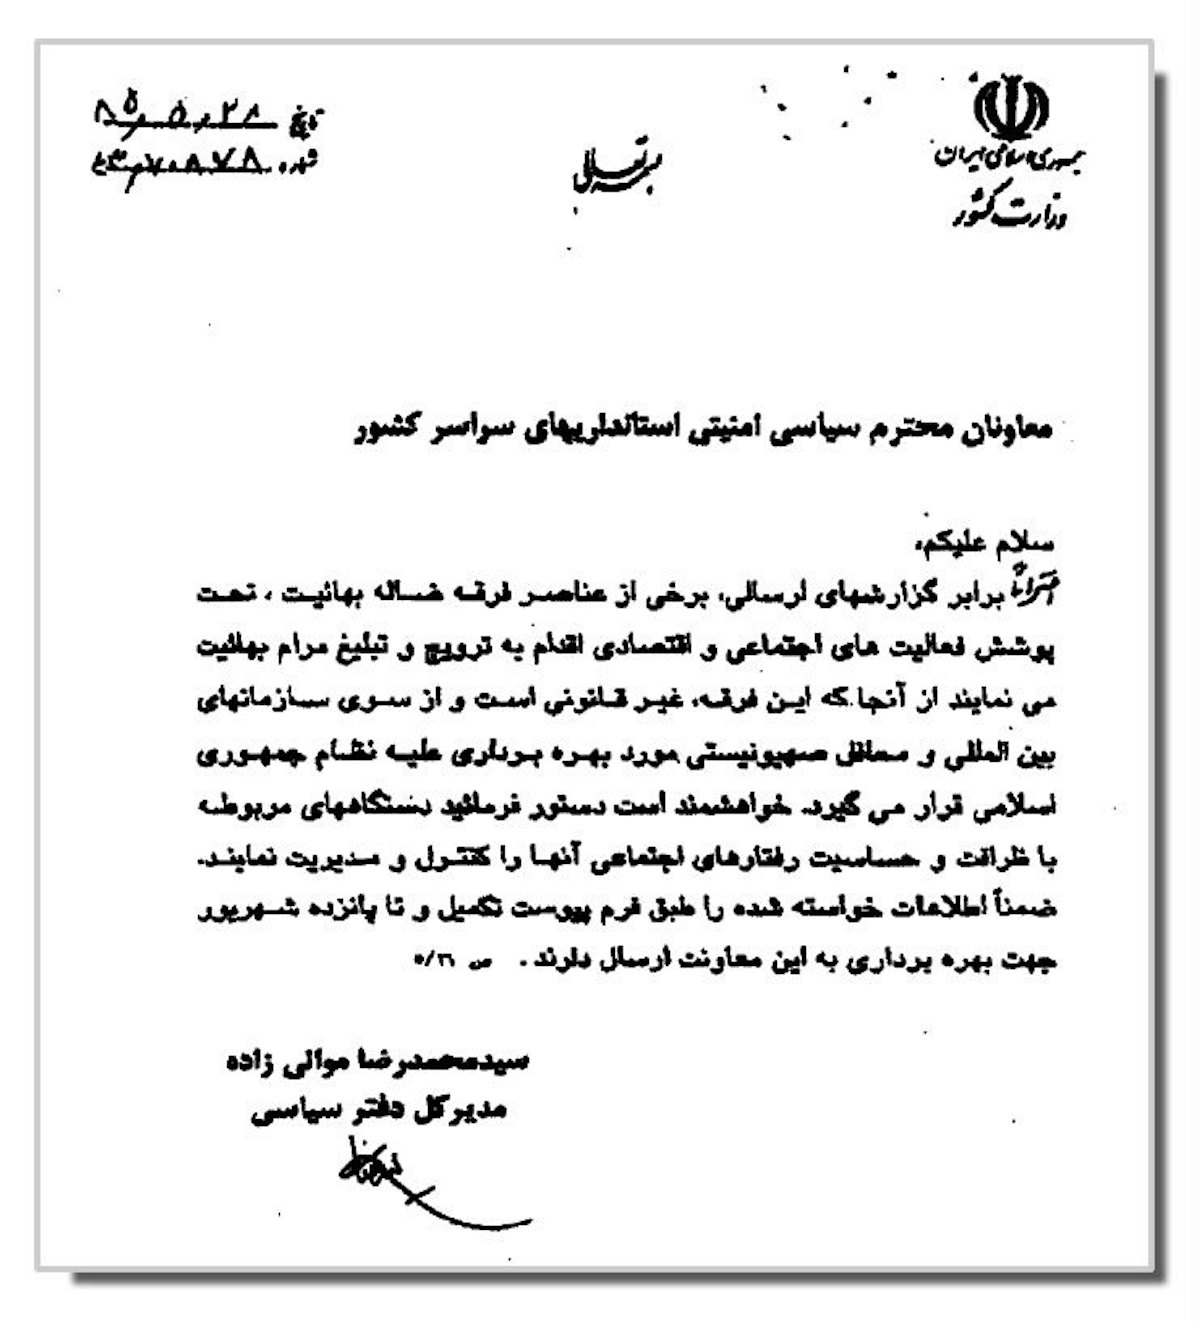 Image of original 19 August 2006 letter from Iran's Ministry of the Interior ordering the stepped up monitoring of Baha'is. To see the entire letter, click here.